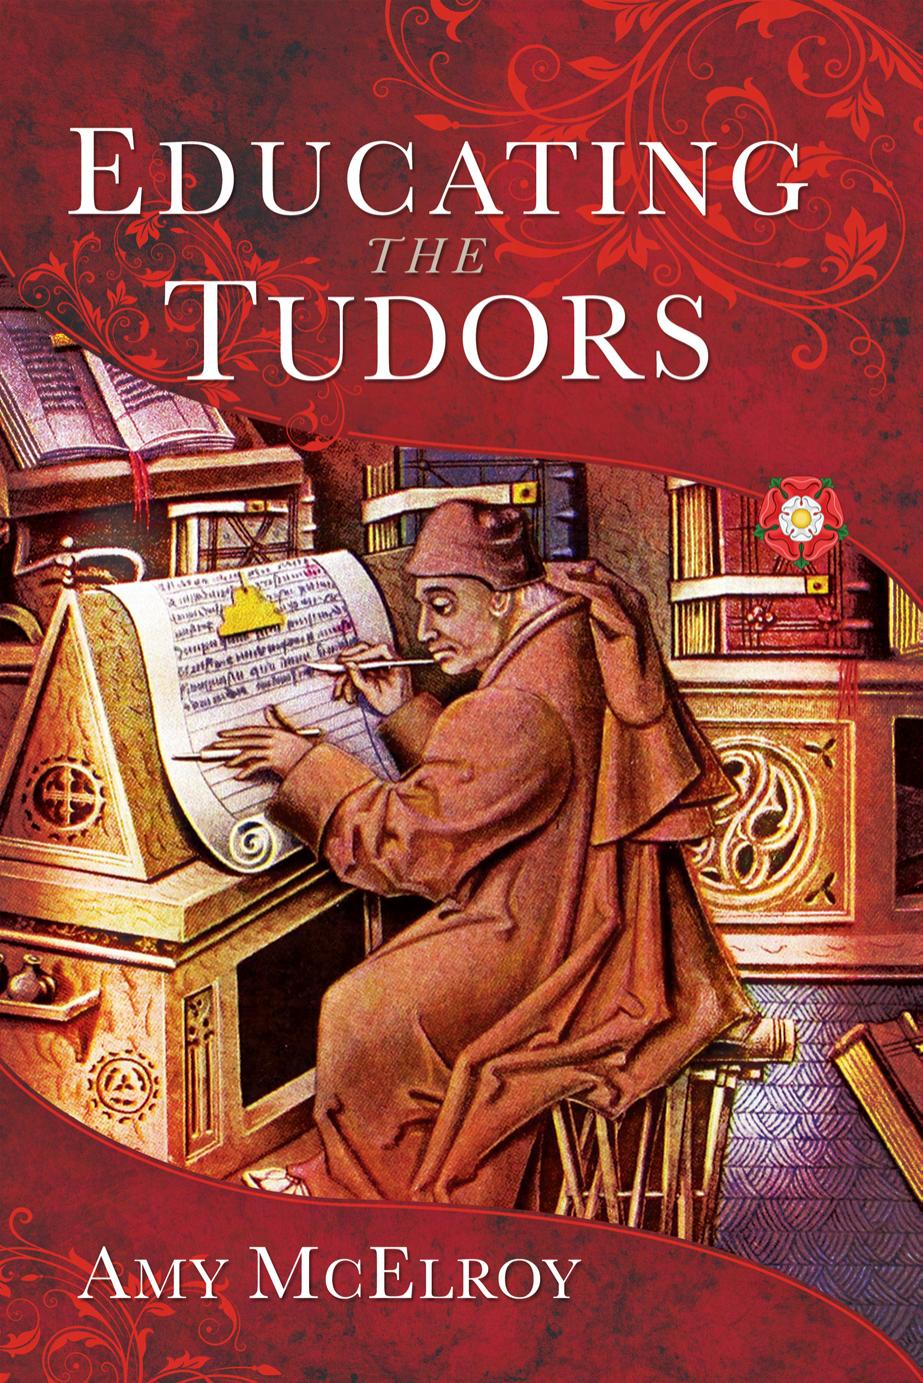 Educating the Tudors by Amy McElroy